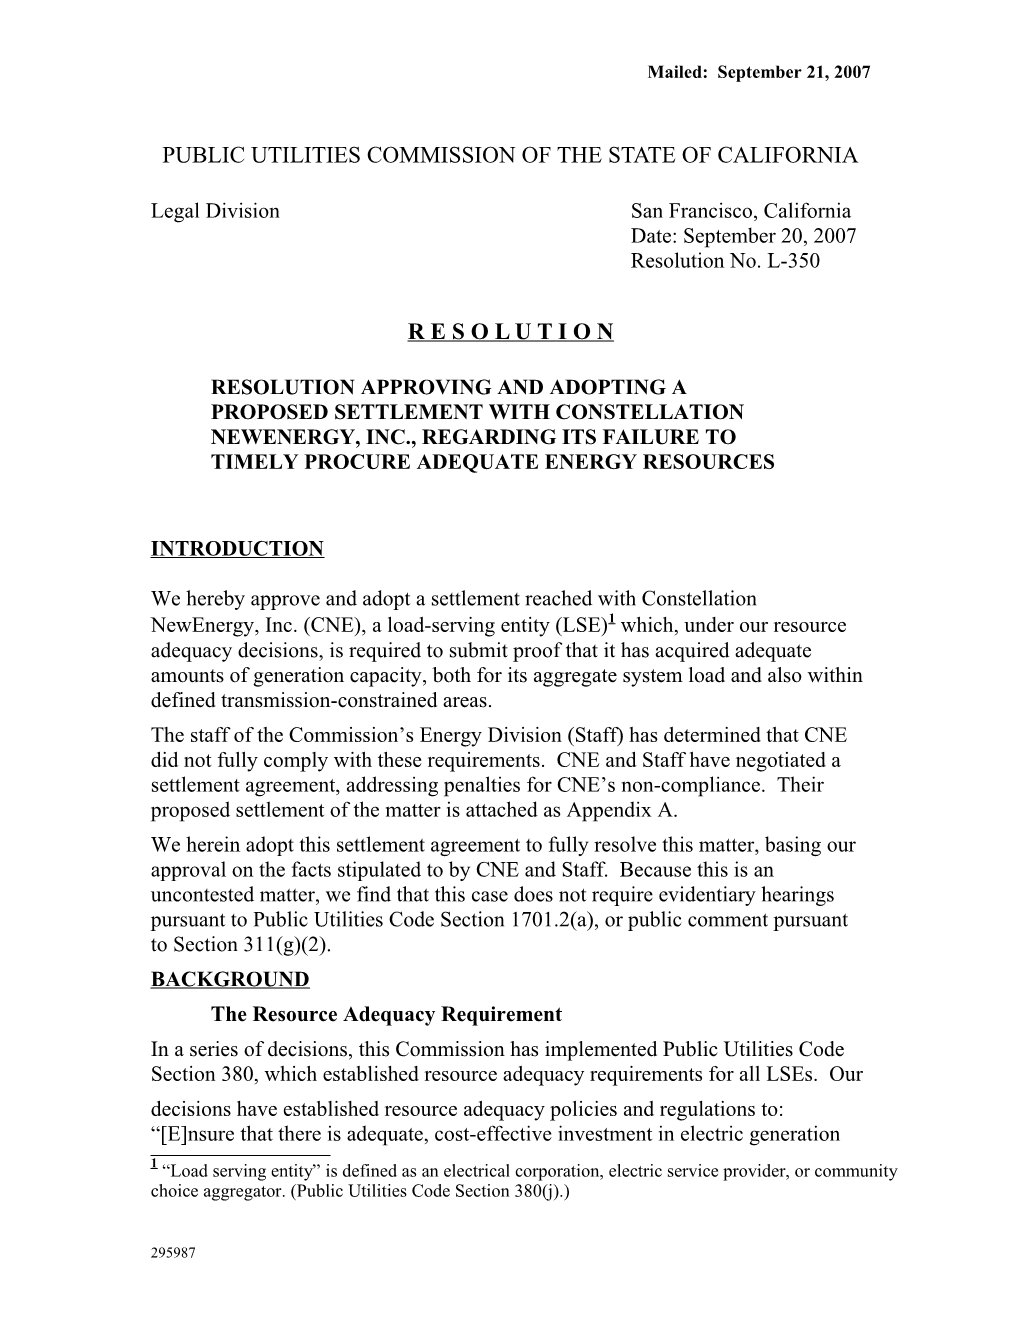 Public Utilities Commission of the State of California s59